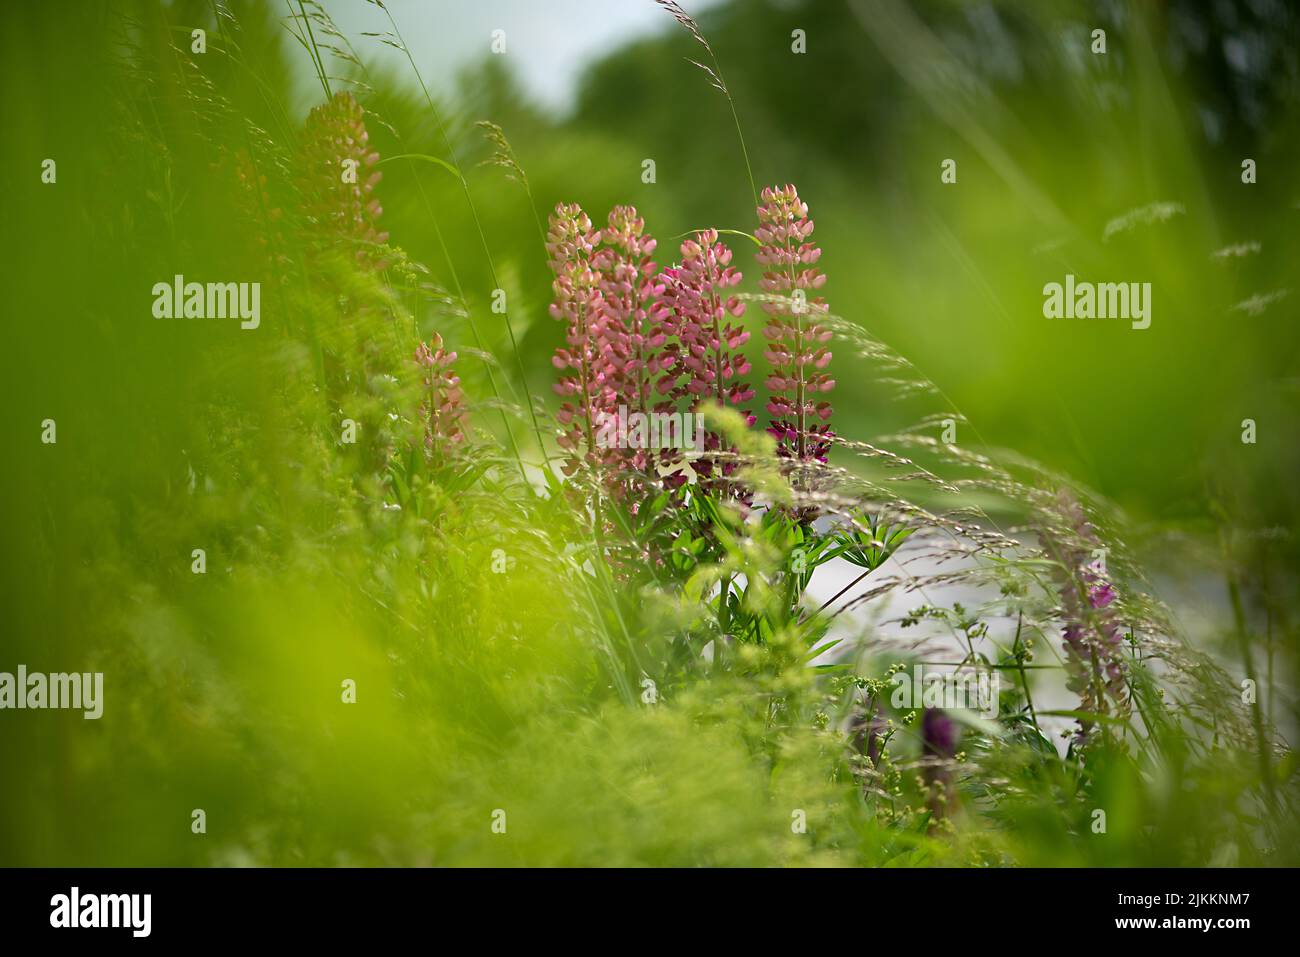 A selective focus shot of a group of pink, long flower plants in a meadow with a blurred background Stock Photo